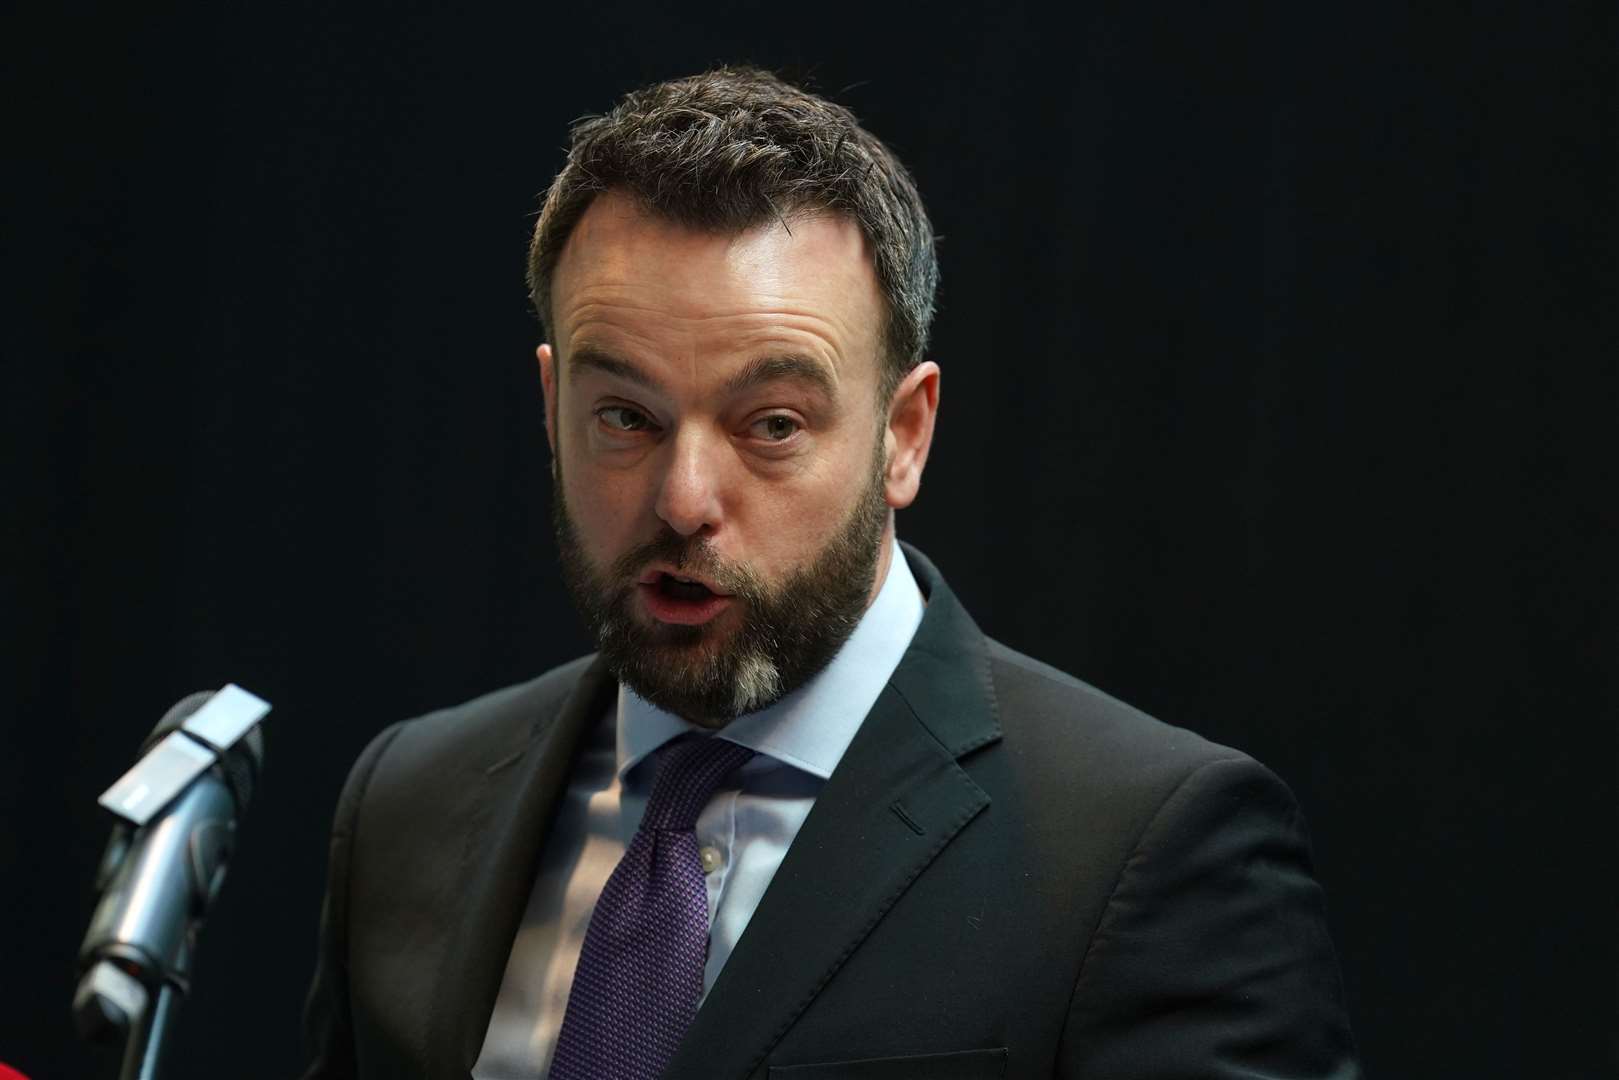 SDLP leader Colum Eastwood said confidence in Mr Byrne had been shattered (Brian Lawless/PA)